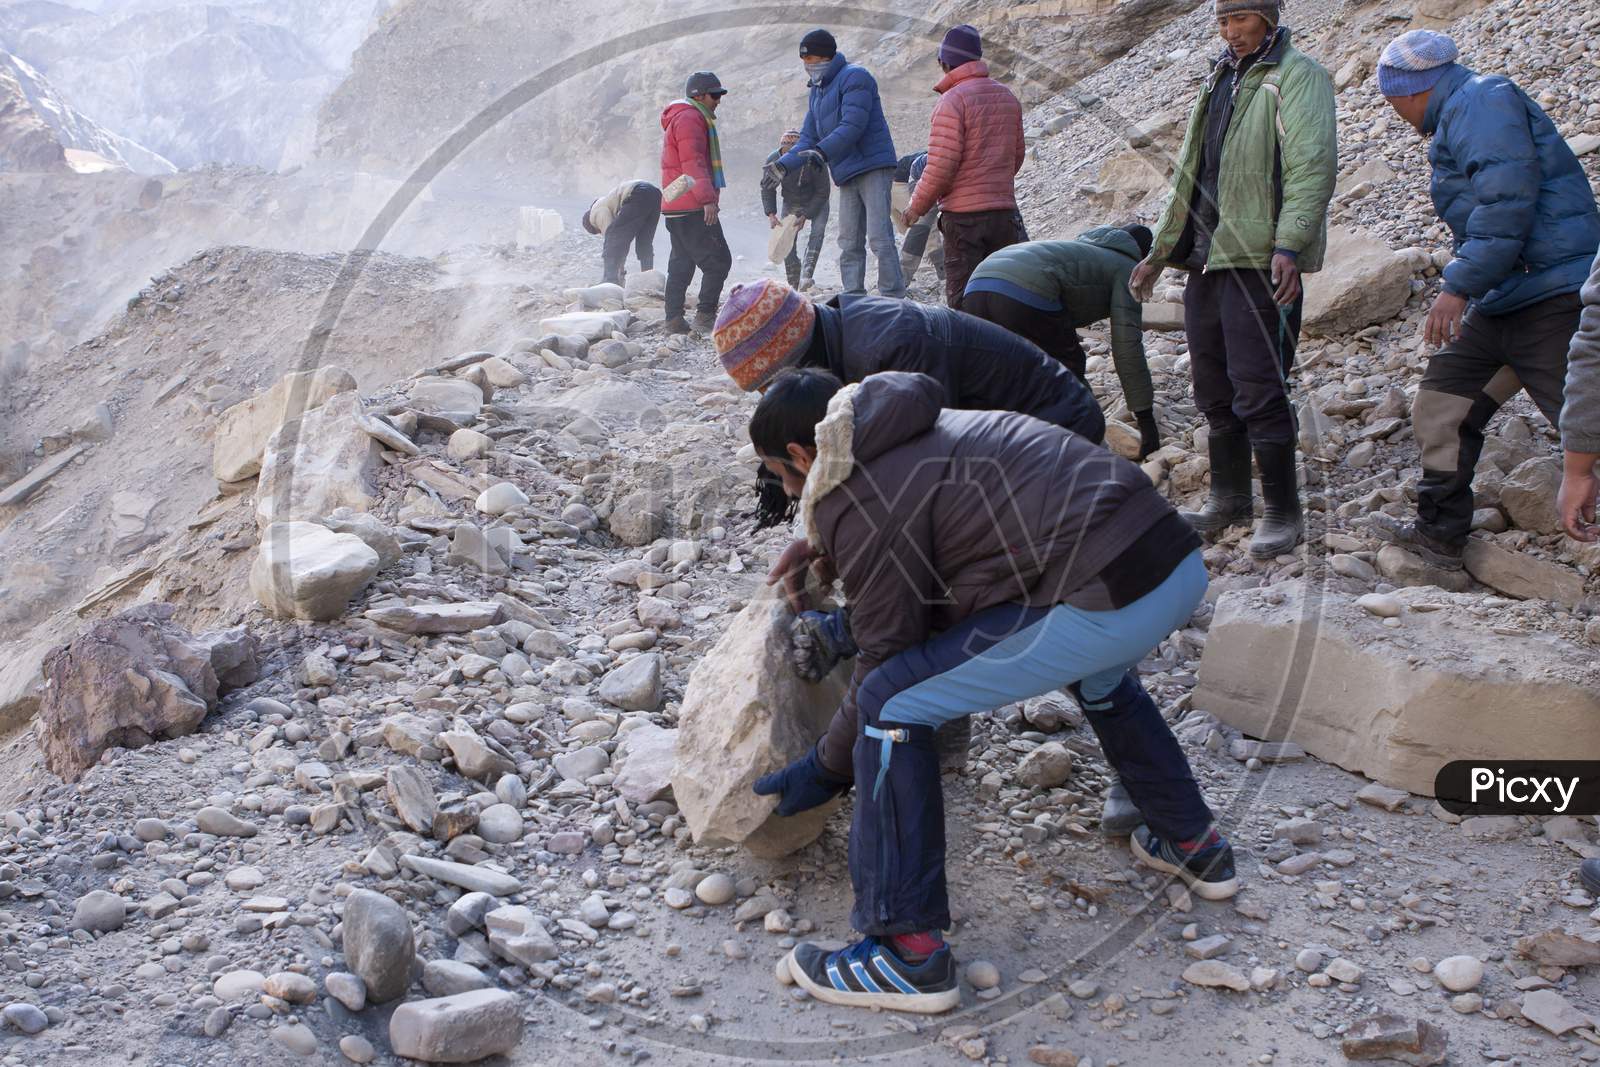 Men Moving Boulders, Clearing Road Blocked Due To Land Slide In A Remote Himalayan High Altitude Road In Ladakh